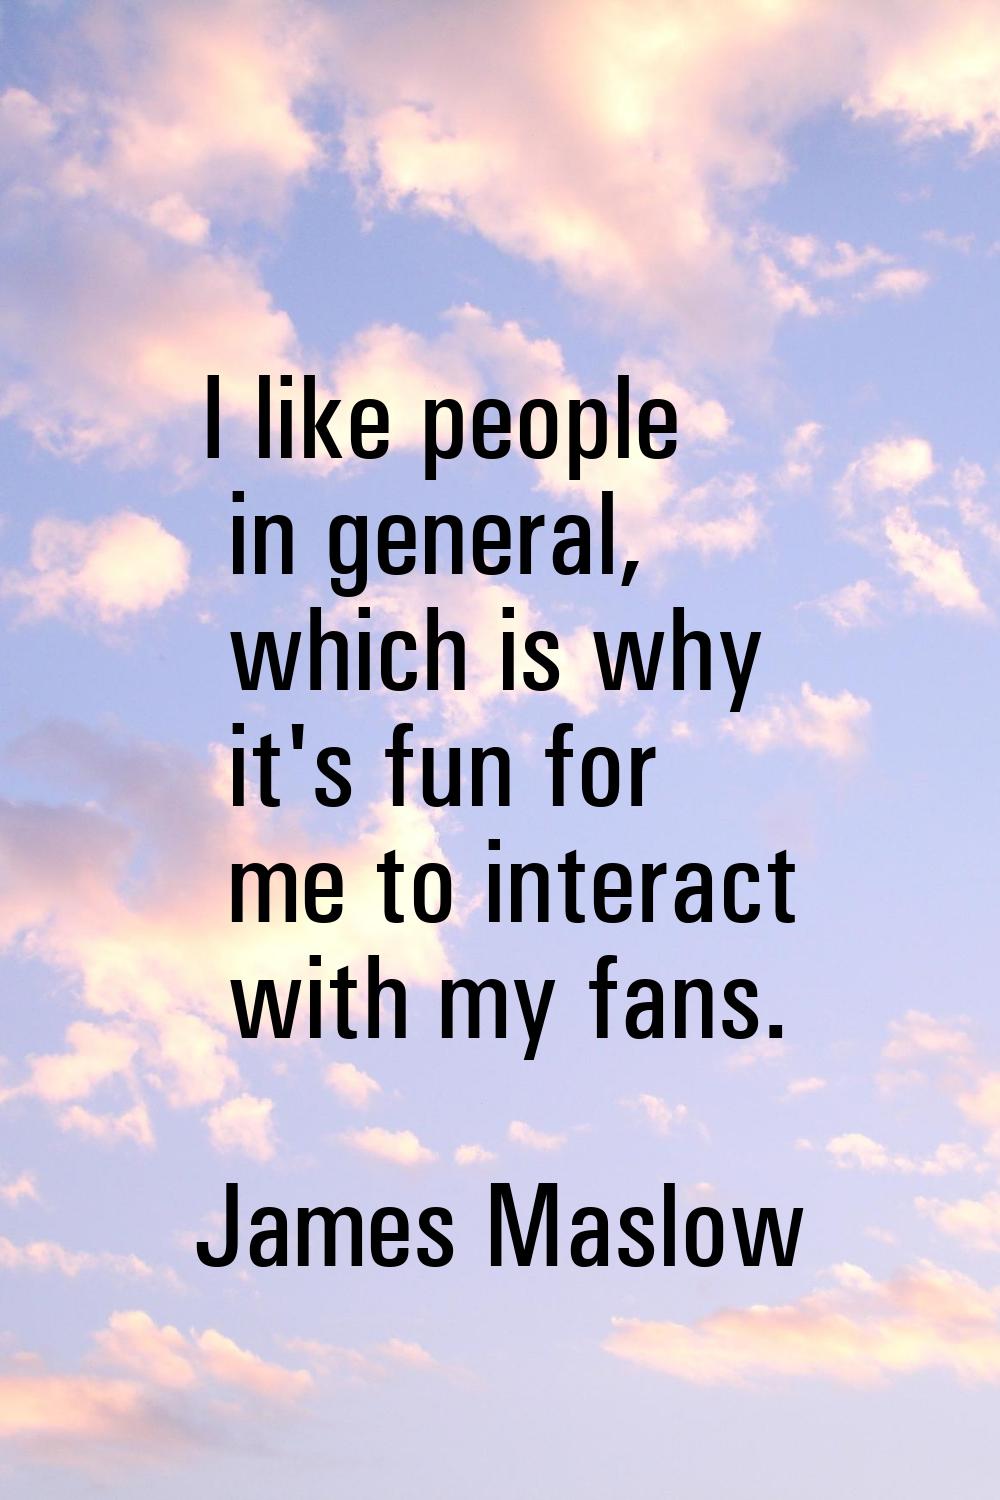 I like people in general, which is why it's fun for me to interact with my fans.